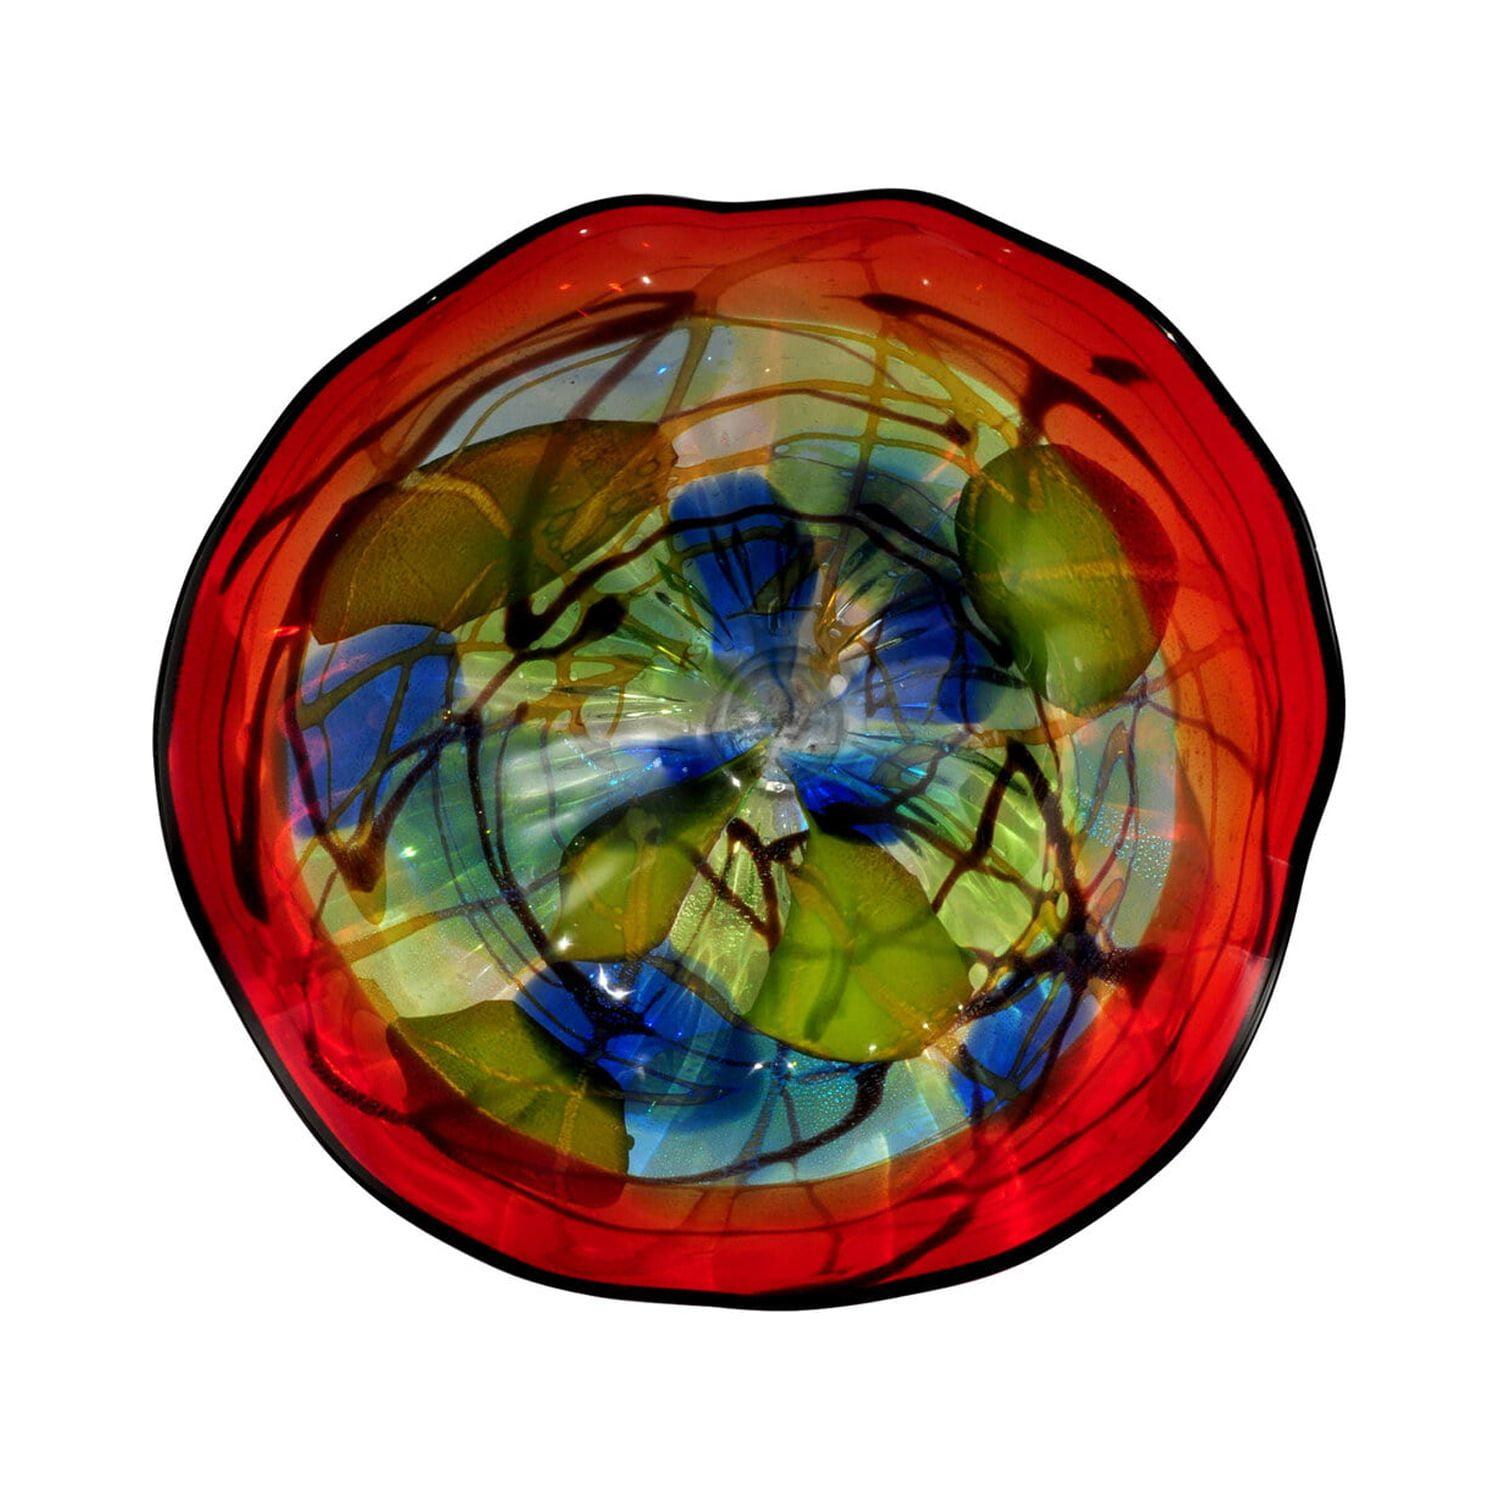 Hankley Swirled Art Glass 12" Wall Decor Plate in Vivid Reds and Blues